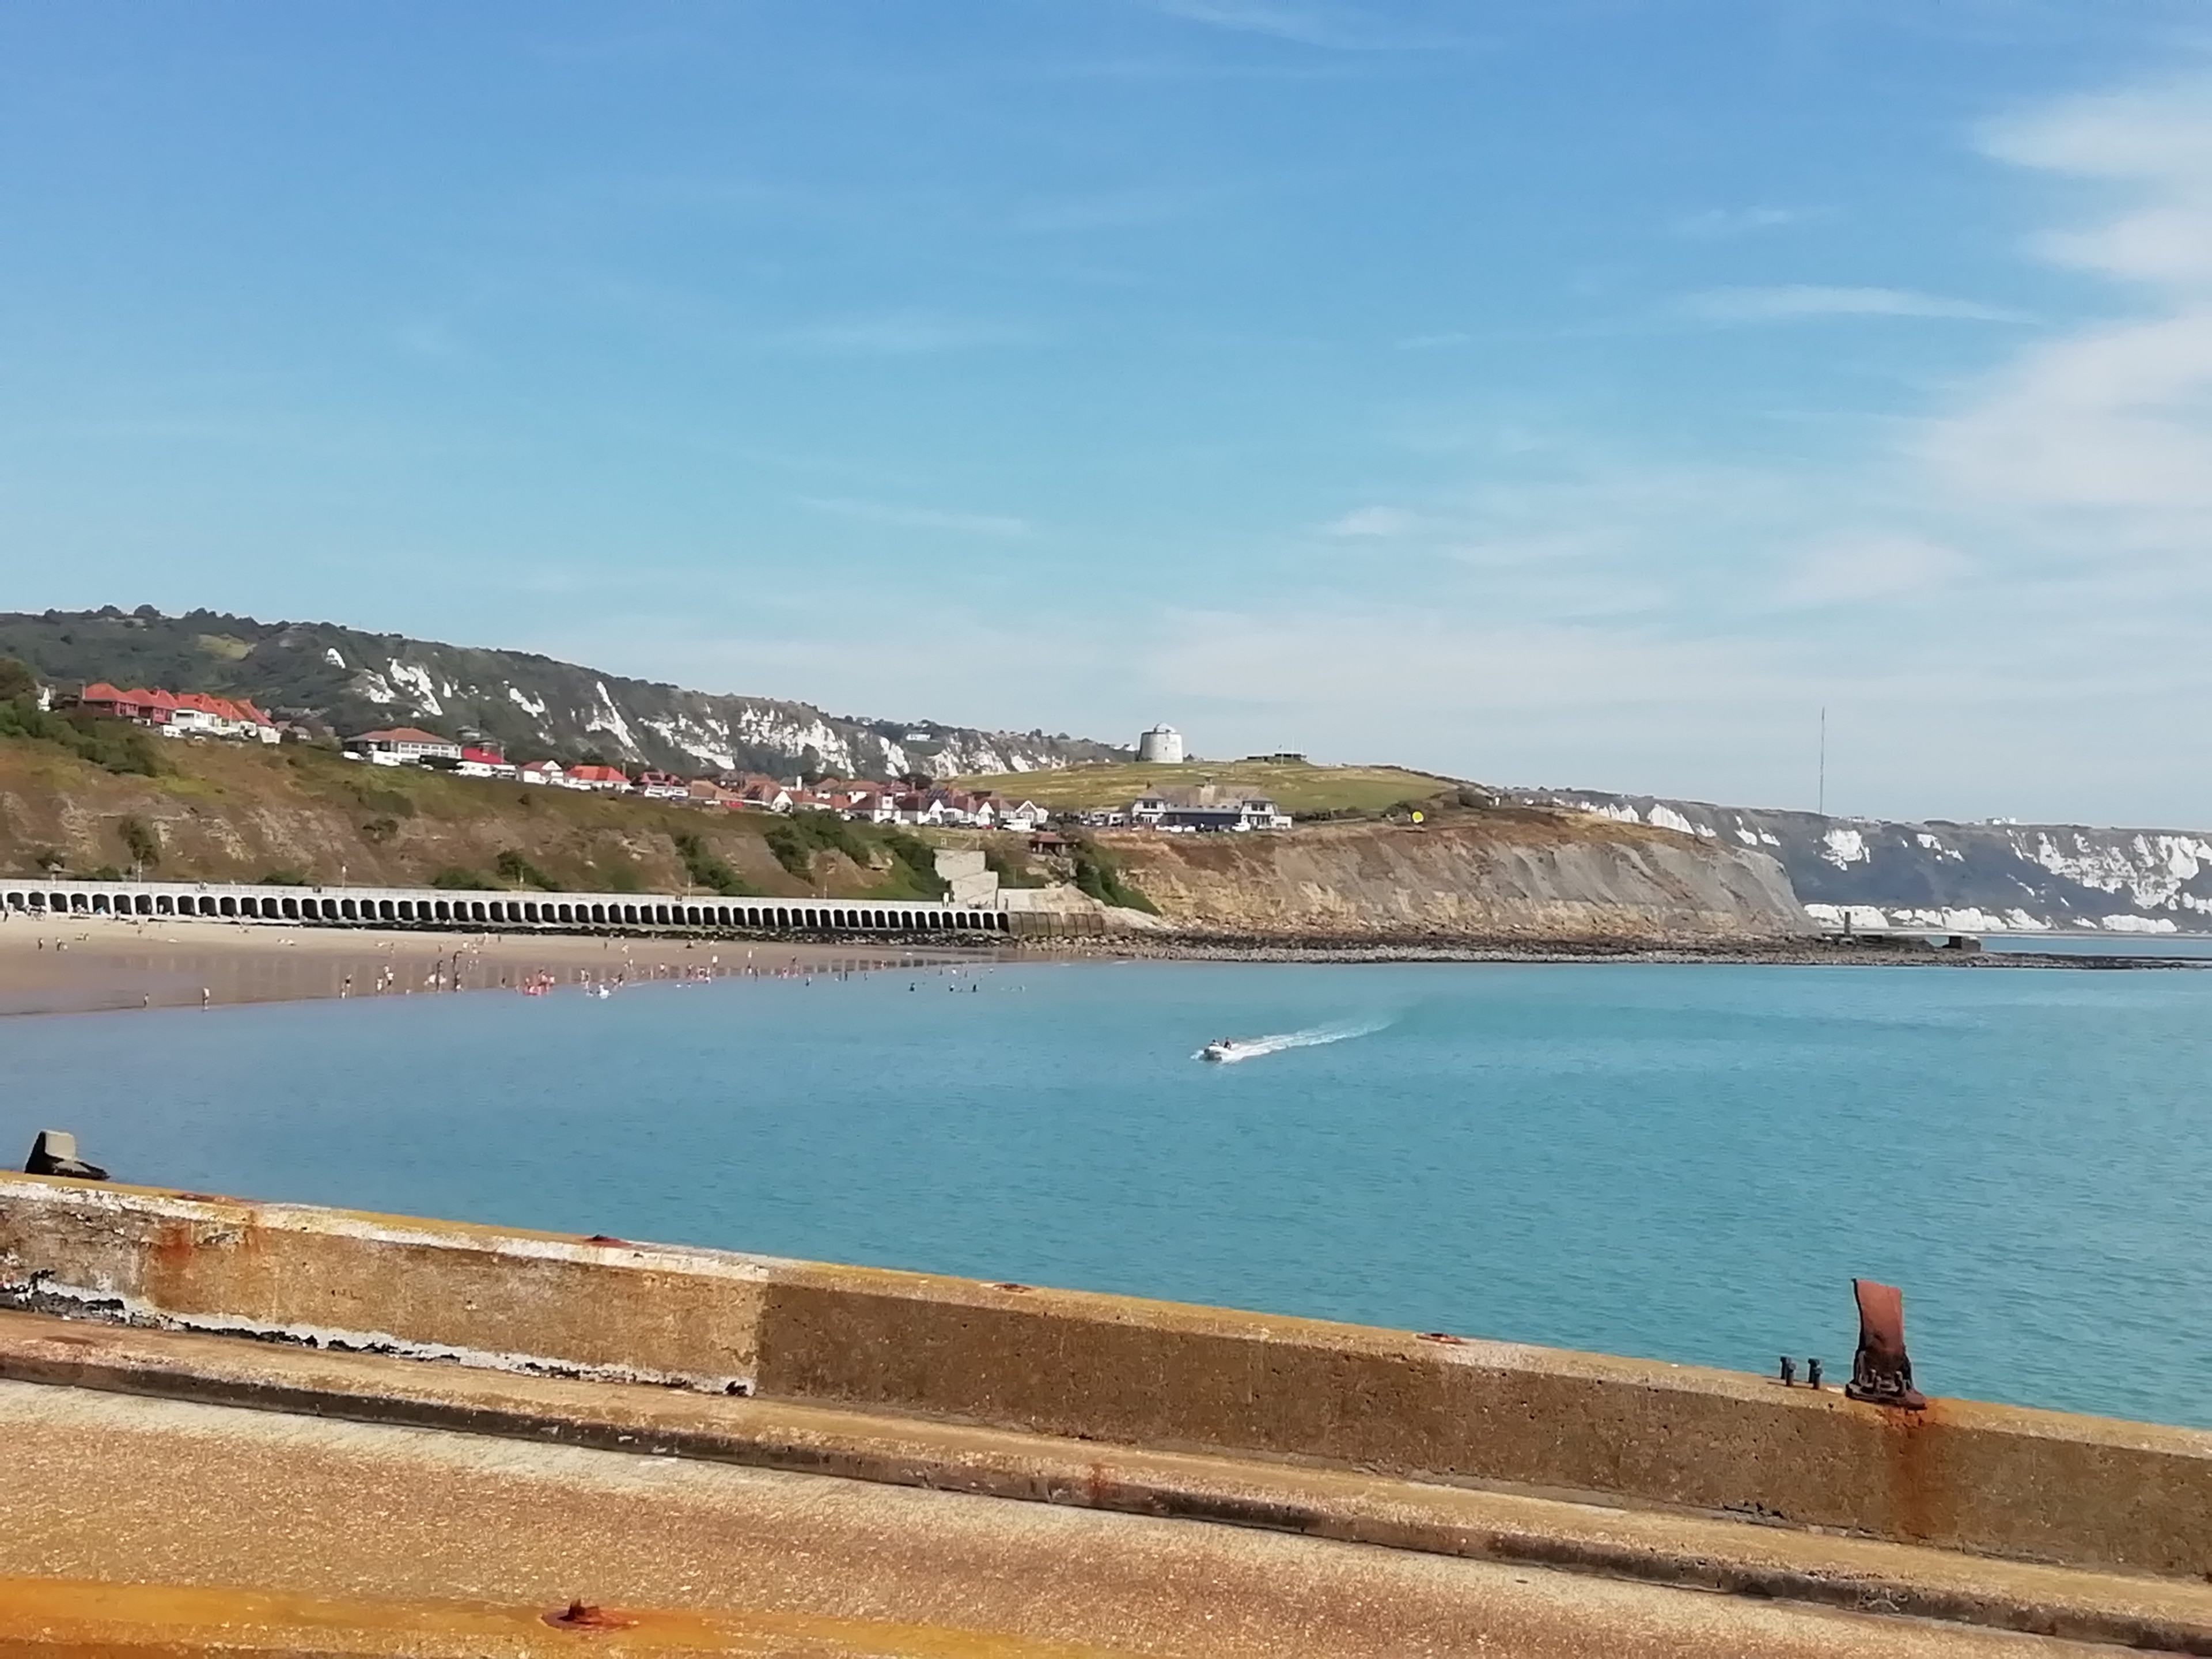 Looking across the harbour to Sunny Sands from the Harbour Arm.